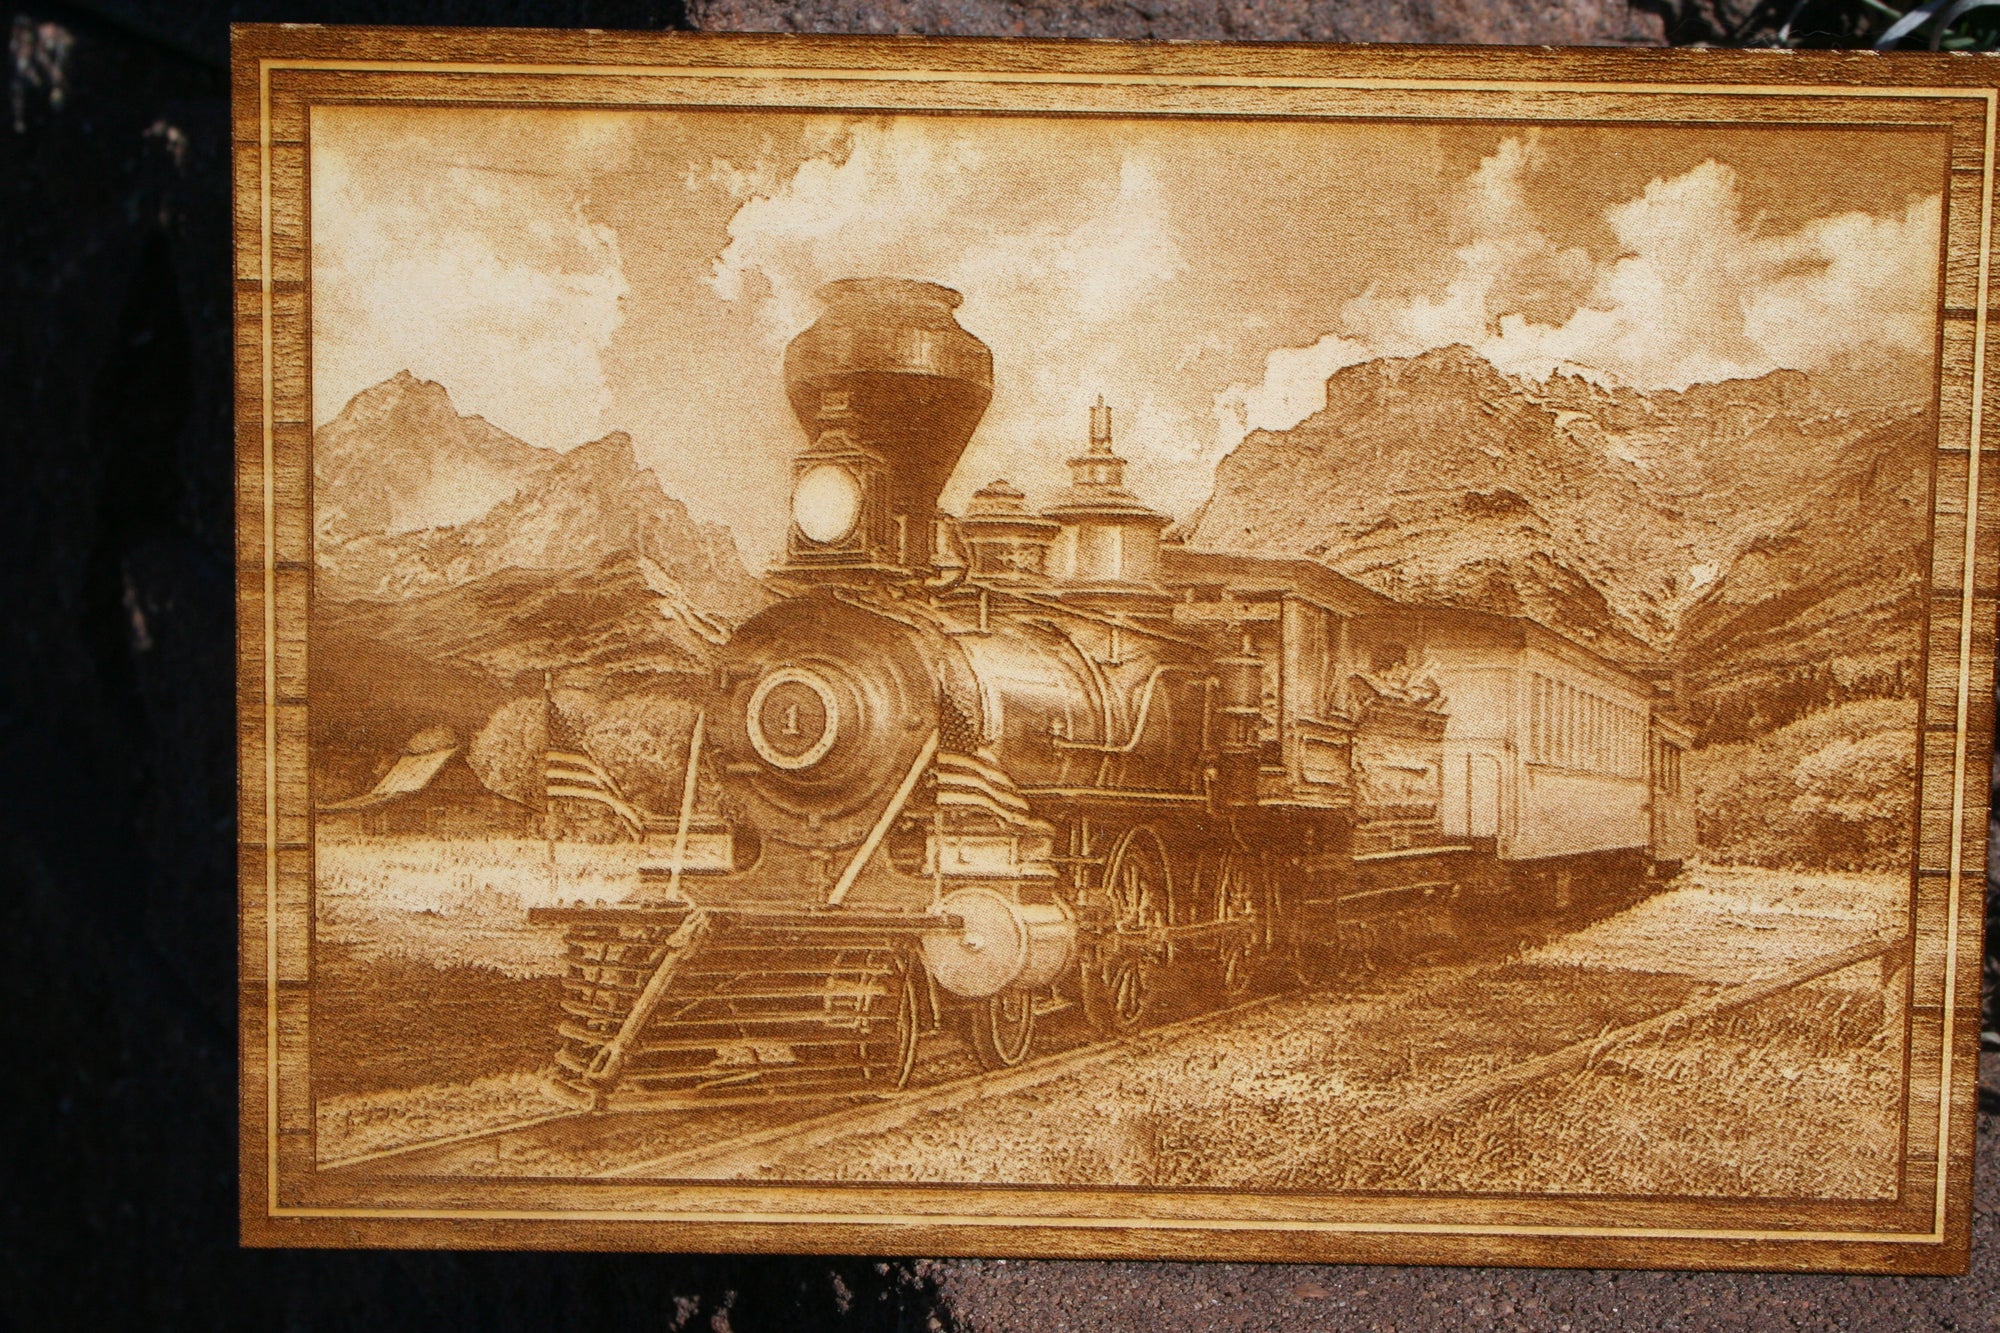 Steam Train moving through a Mountain Pass - Laser Engraved Wall Decor on Baltic Birch (10 x 7 Inches) - 23 Skidoo Laser Gifts